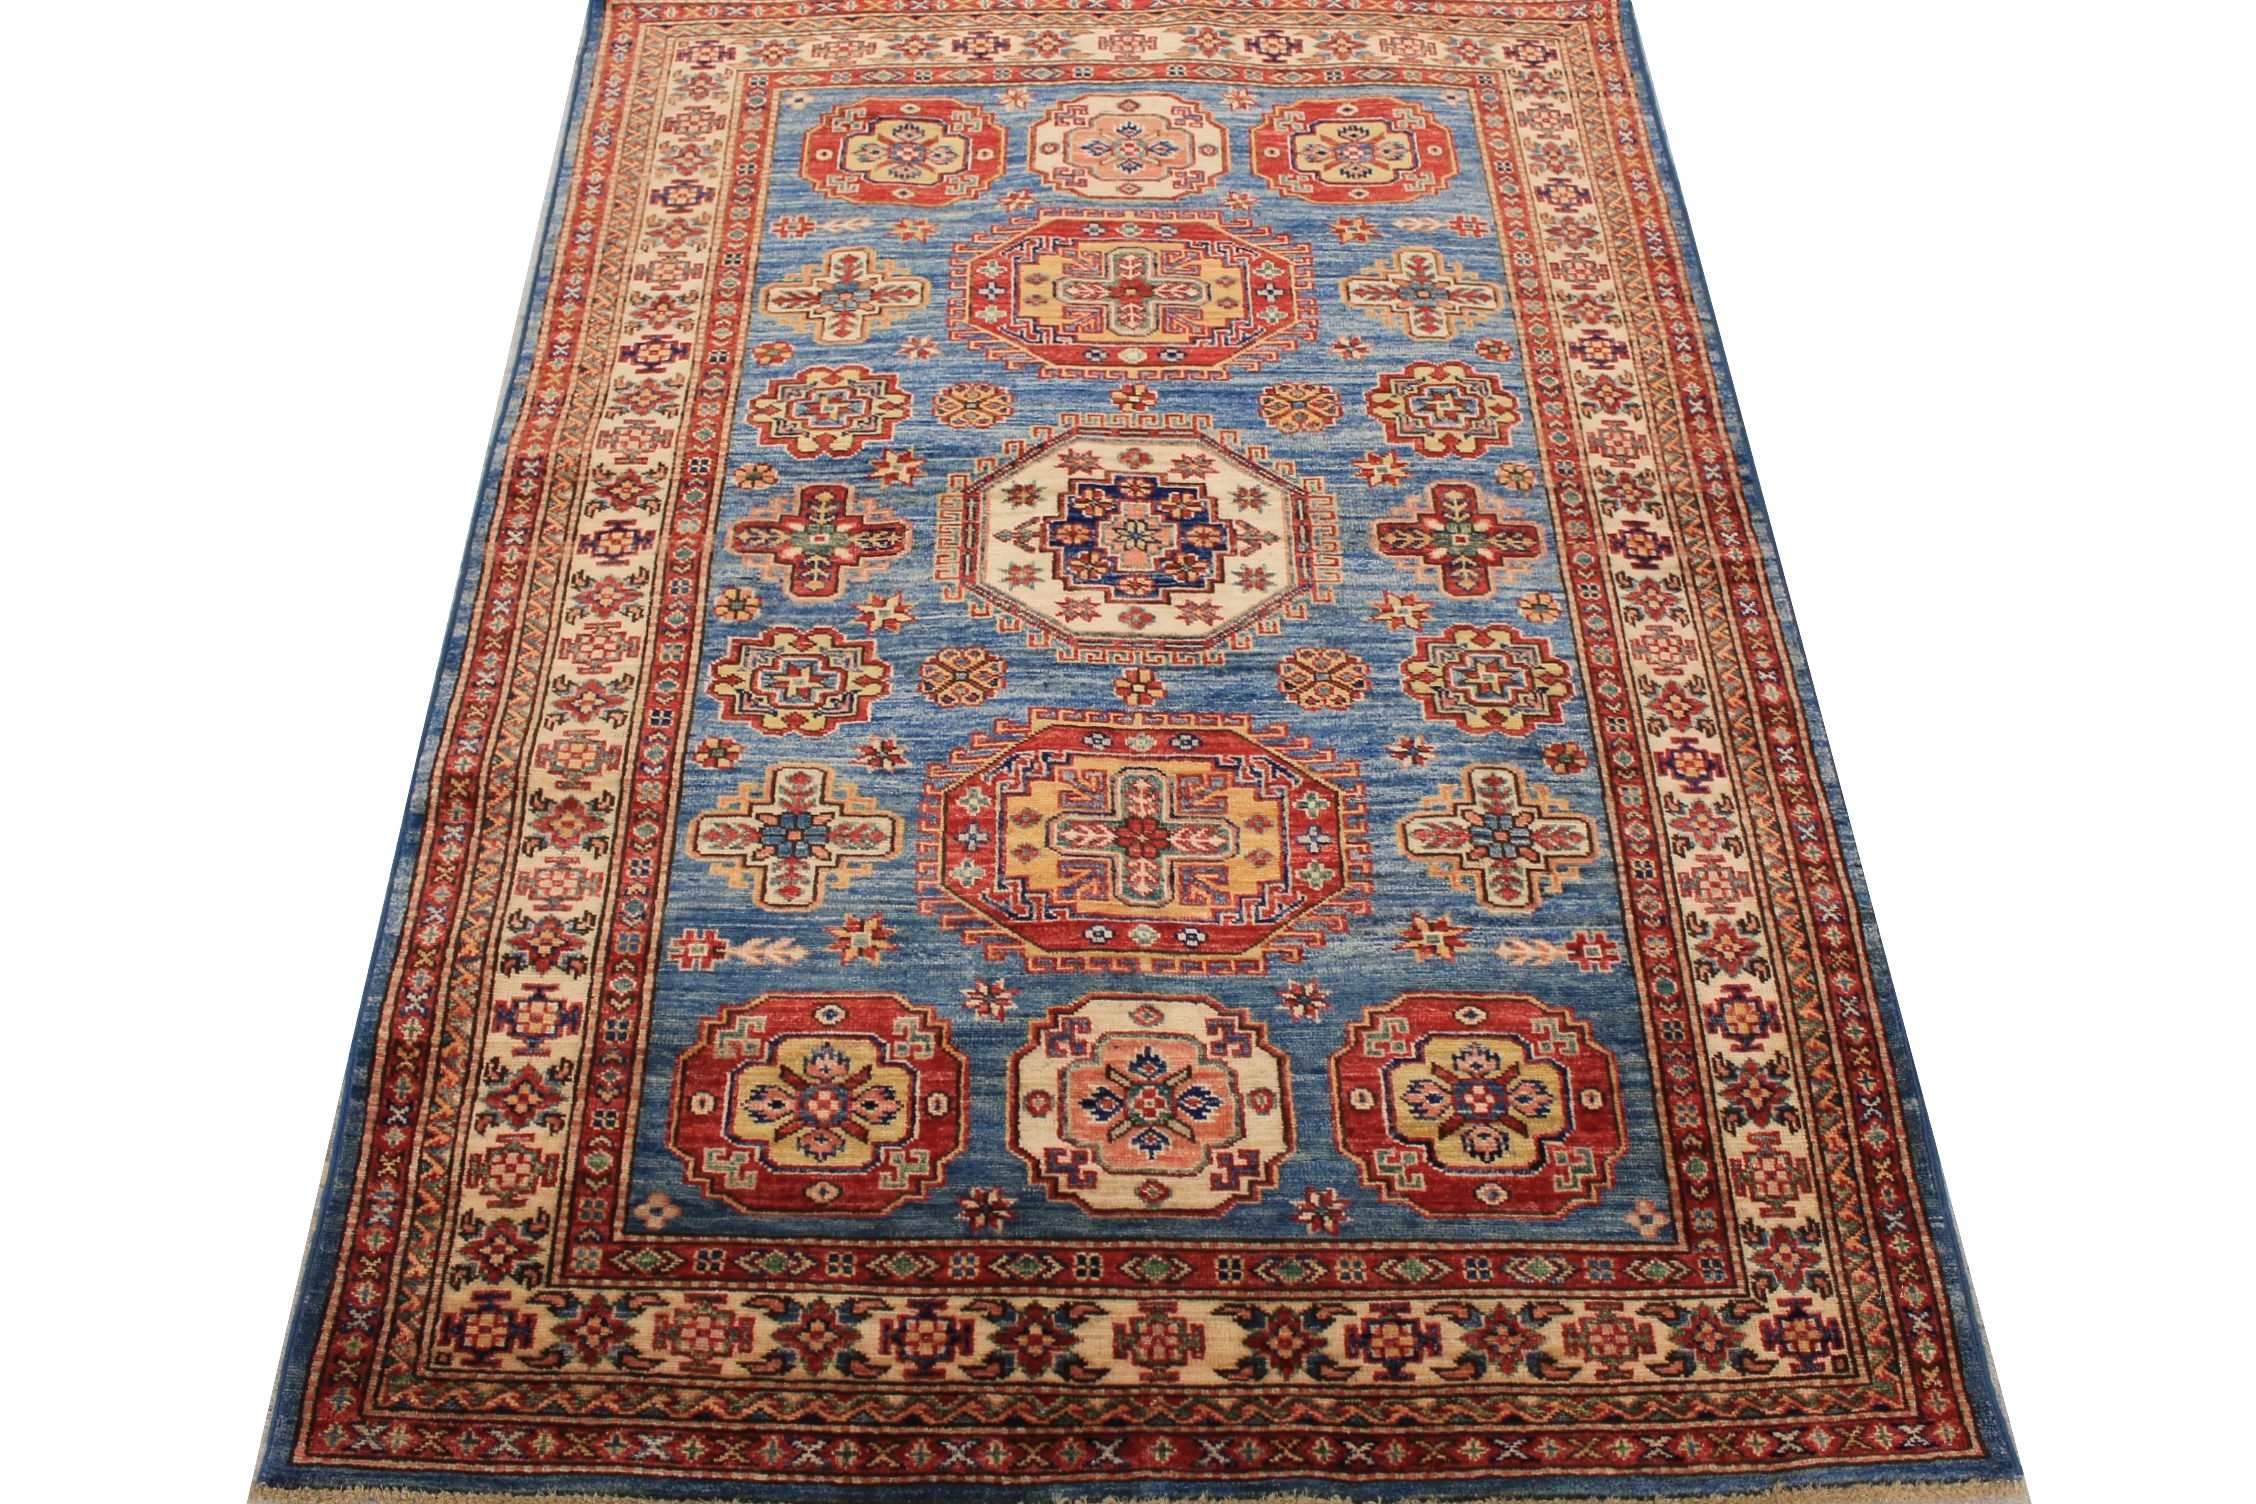 4x6 Kazak Hand Knotted Wool Area Rug - MR026173